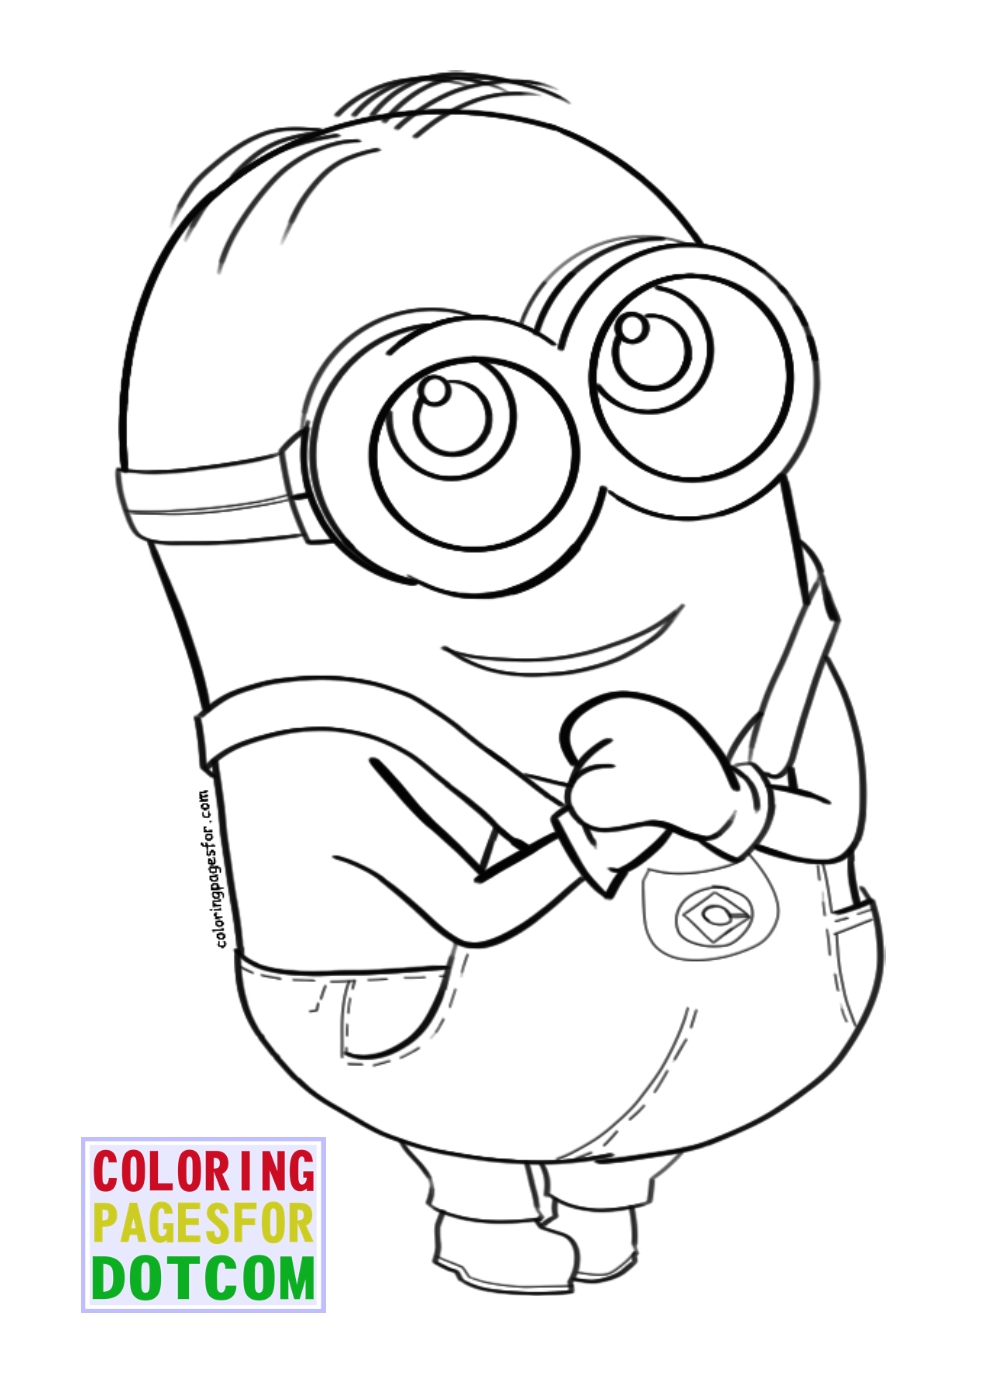 Minions Coloring Pages 20 by blackartist20 on DeviantArt